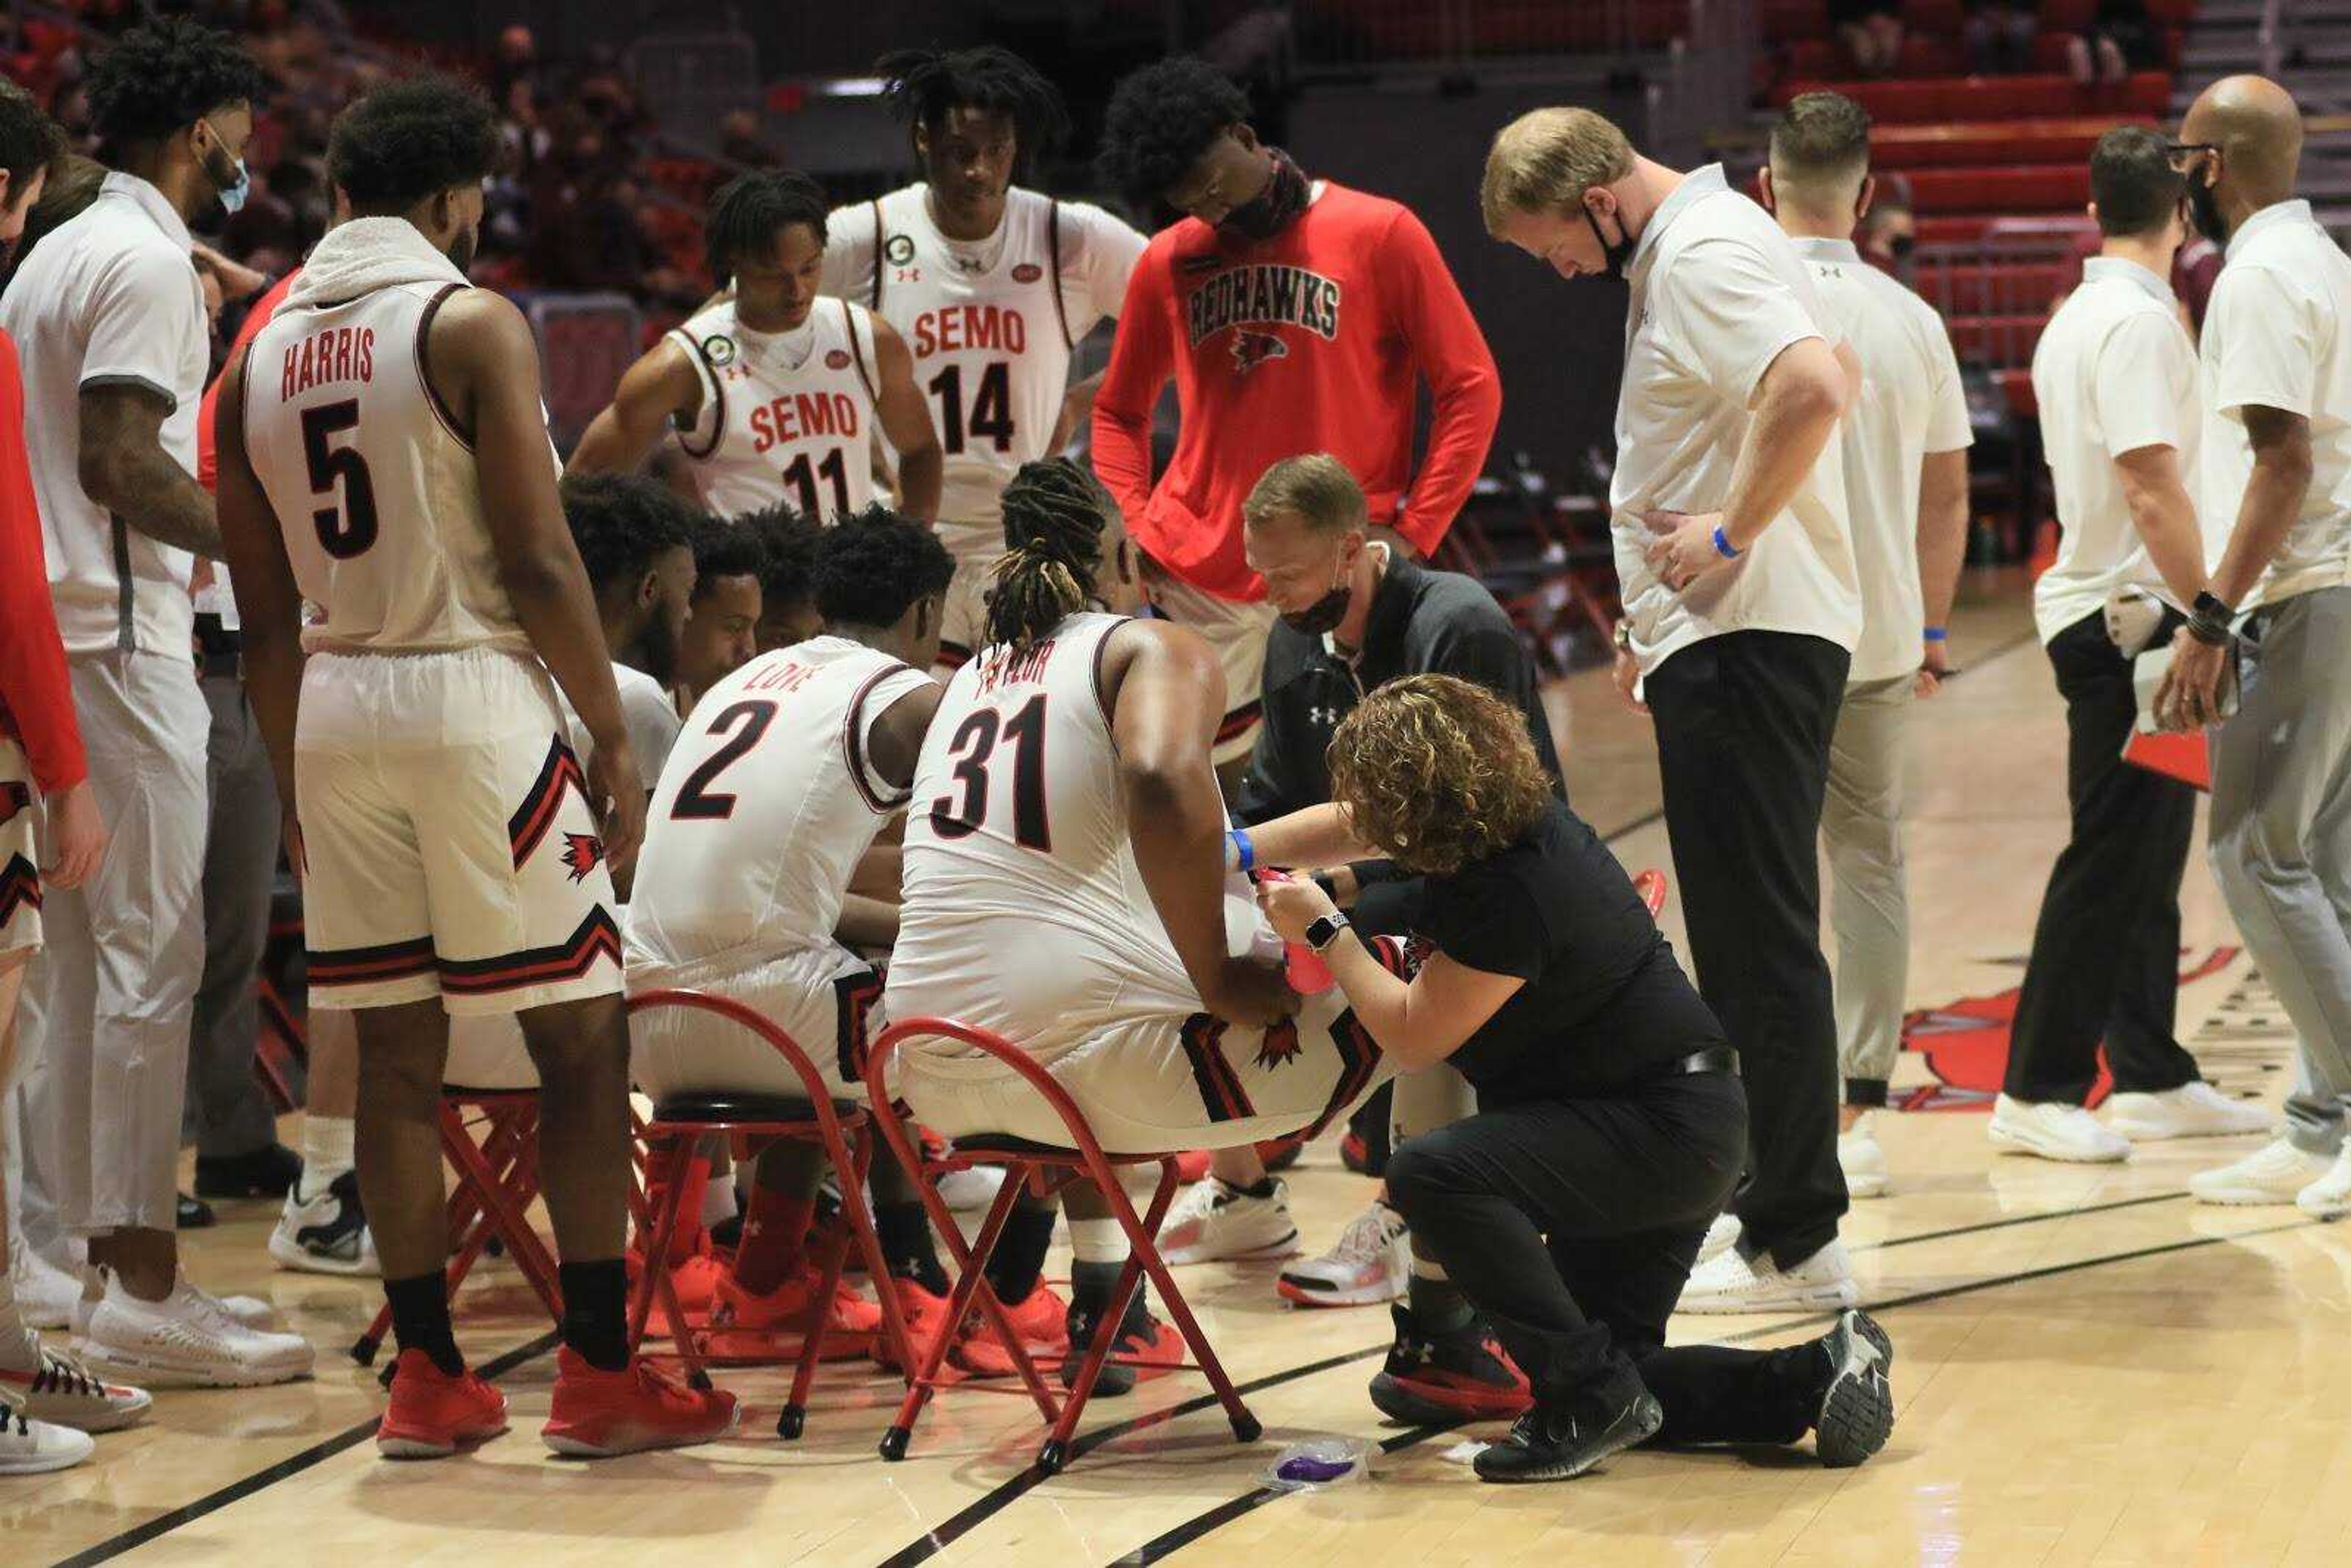 Brad Korn instructs his team during a timeout in Southeast’s 87-79 overtime loss to Southern Illinois on Dec. 2 at the Show Me Center in Cape Girardeau.